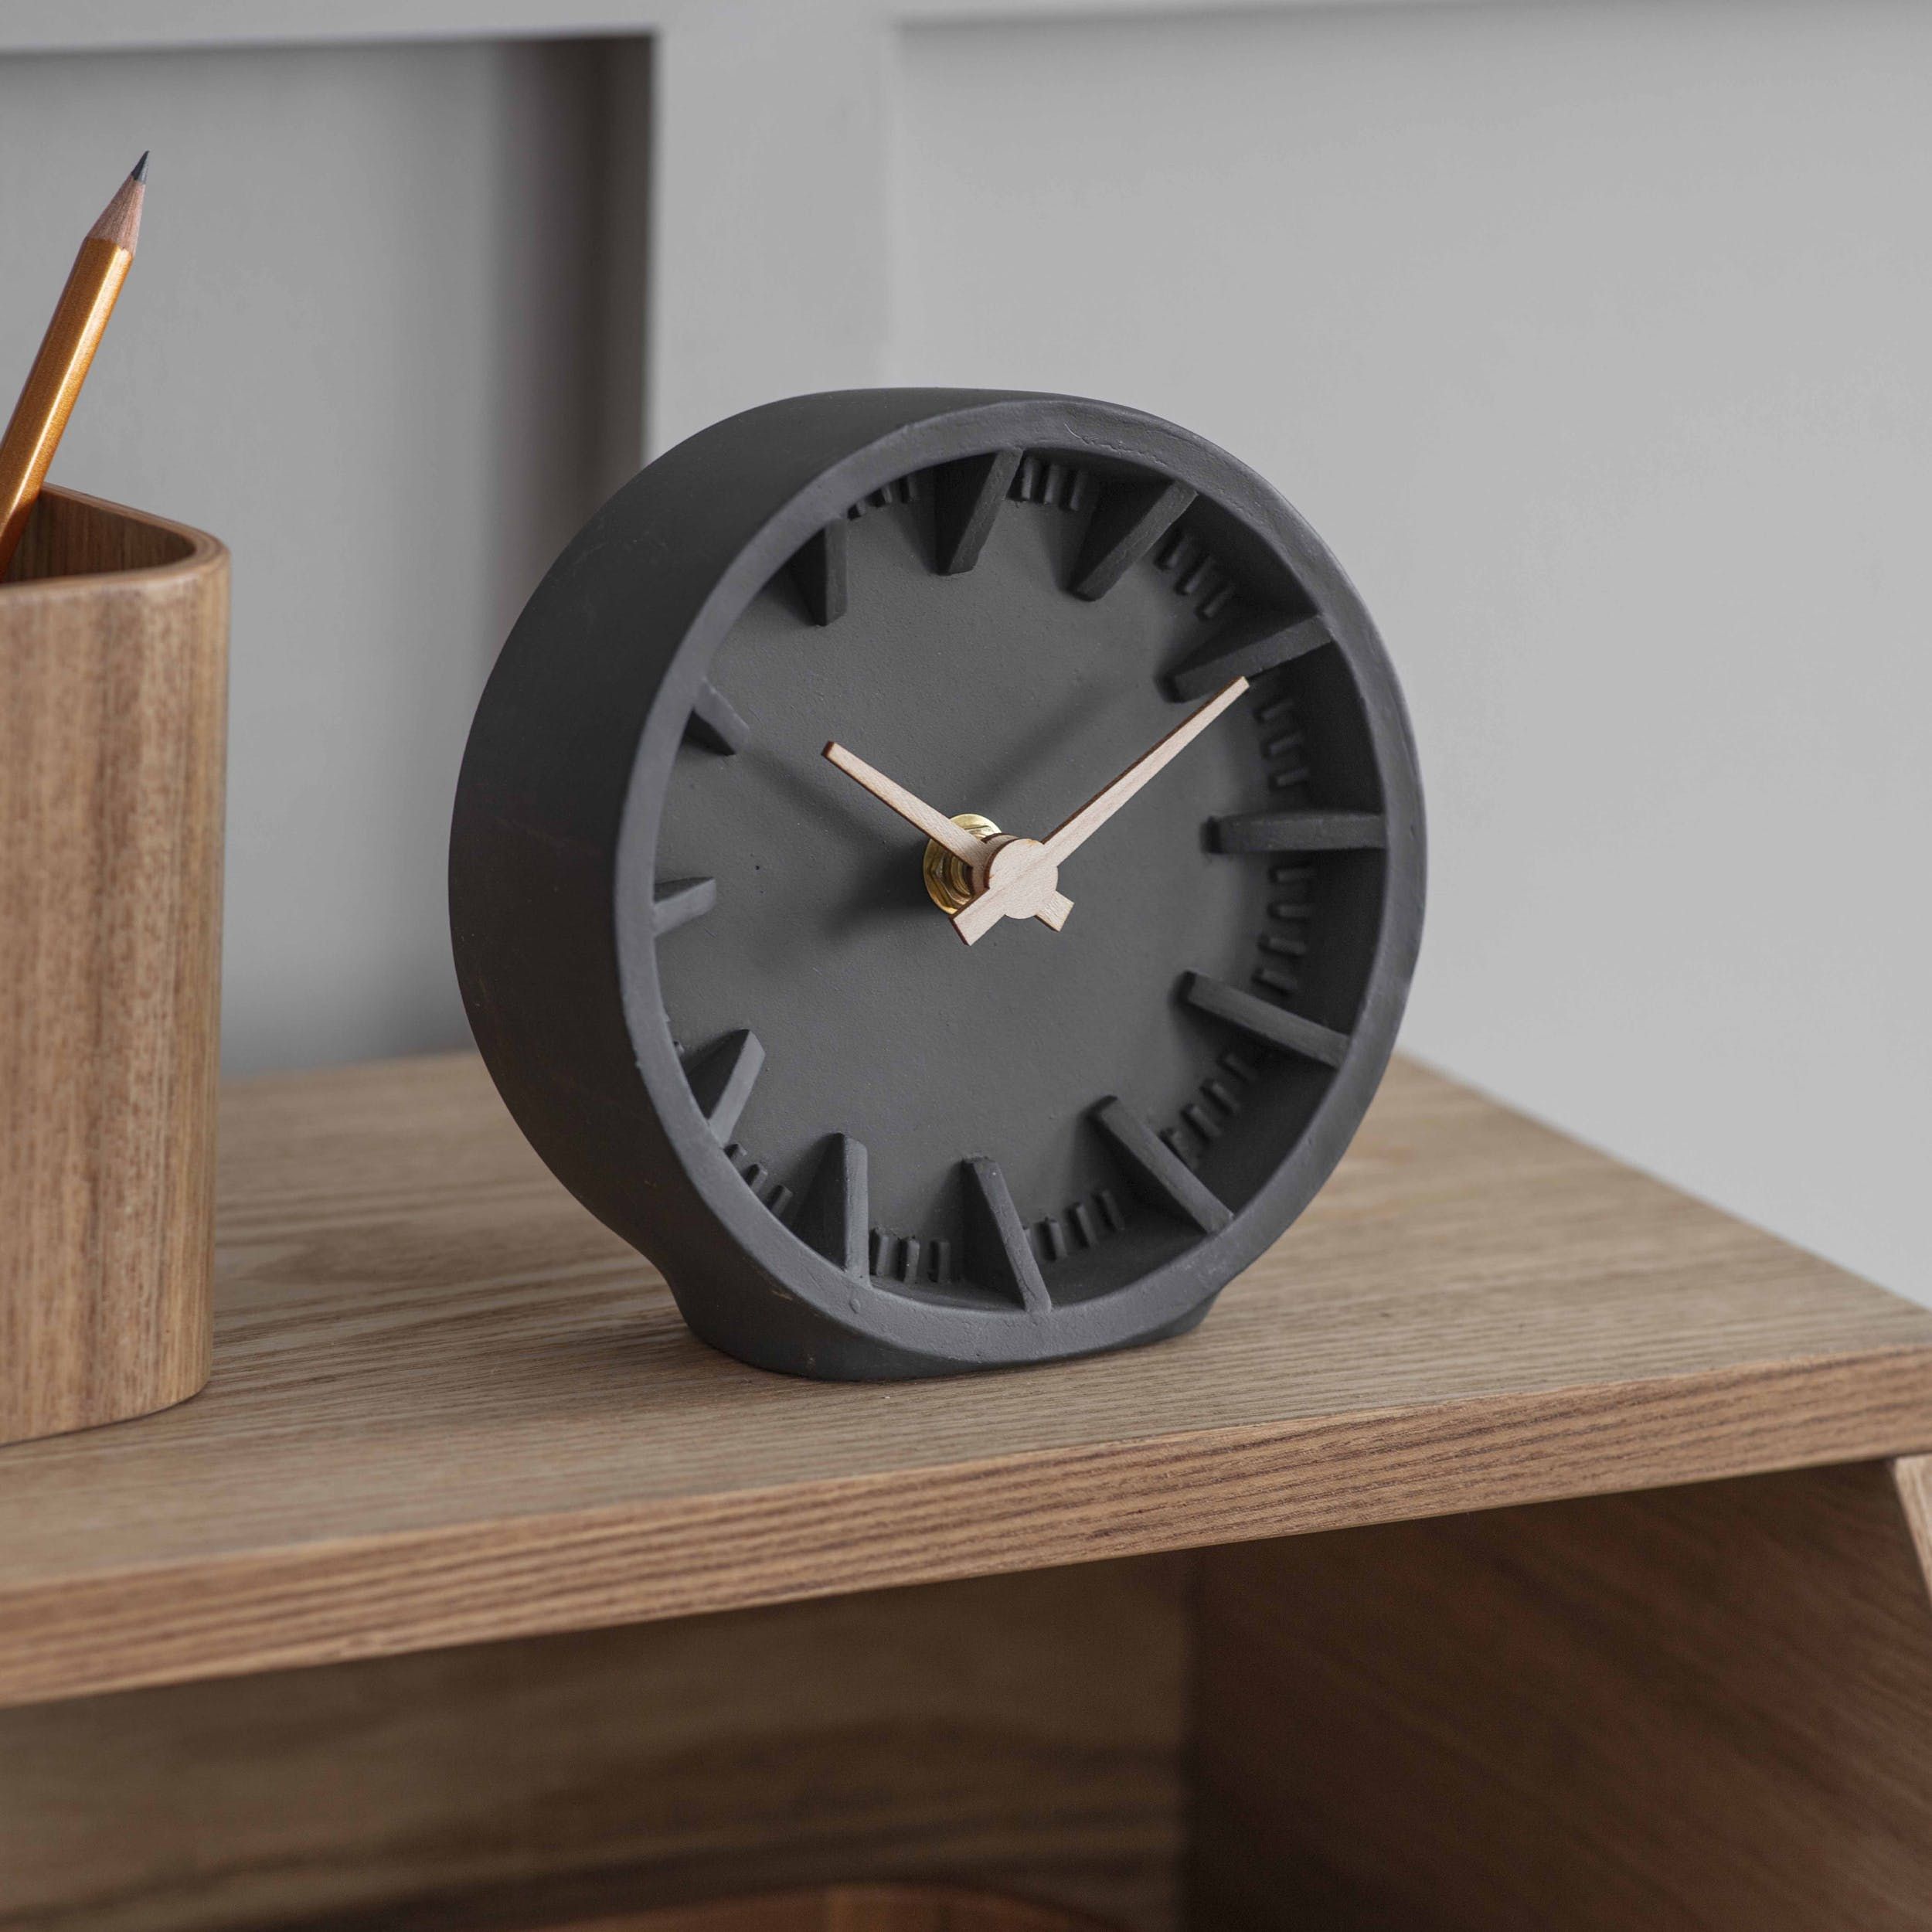 Timeless Treasures: Personalized Clocks
That Reflect Your Style